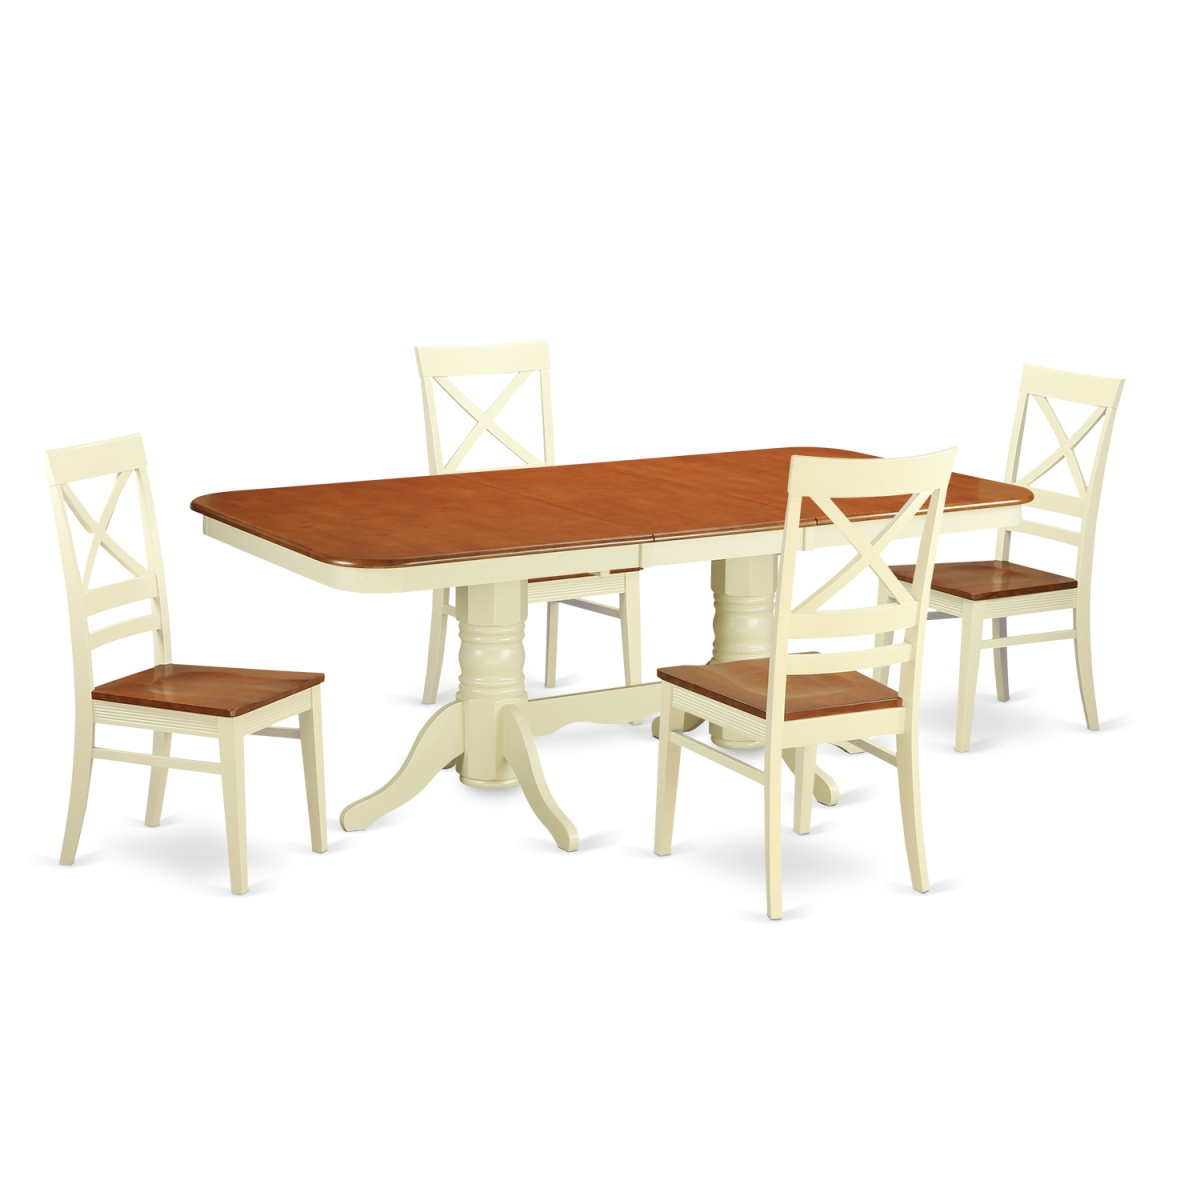 Solid Rubberwood 5-piece Dining Set with Napolean Table and Four Quincy Chairs - Contemporary Buttermilk and Cherry Finish -  East West Furniture, NAQU5-WHI-W